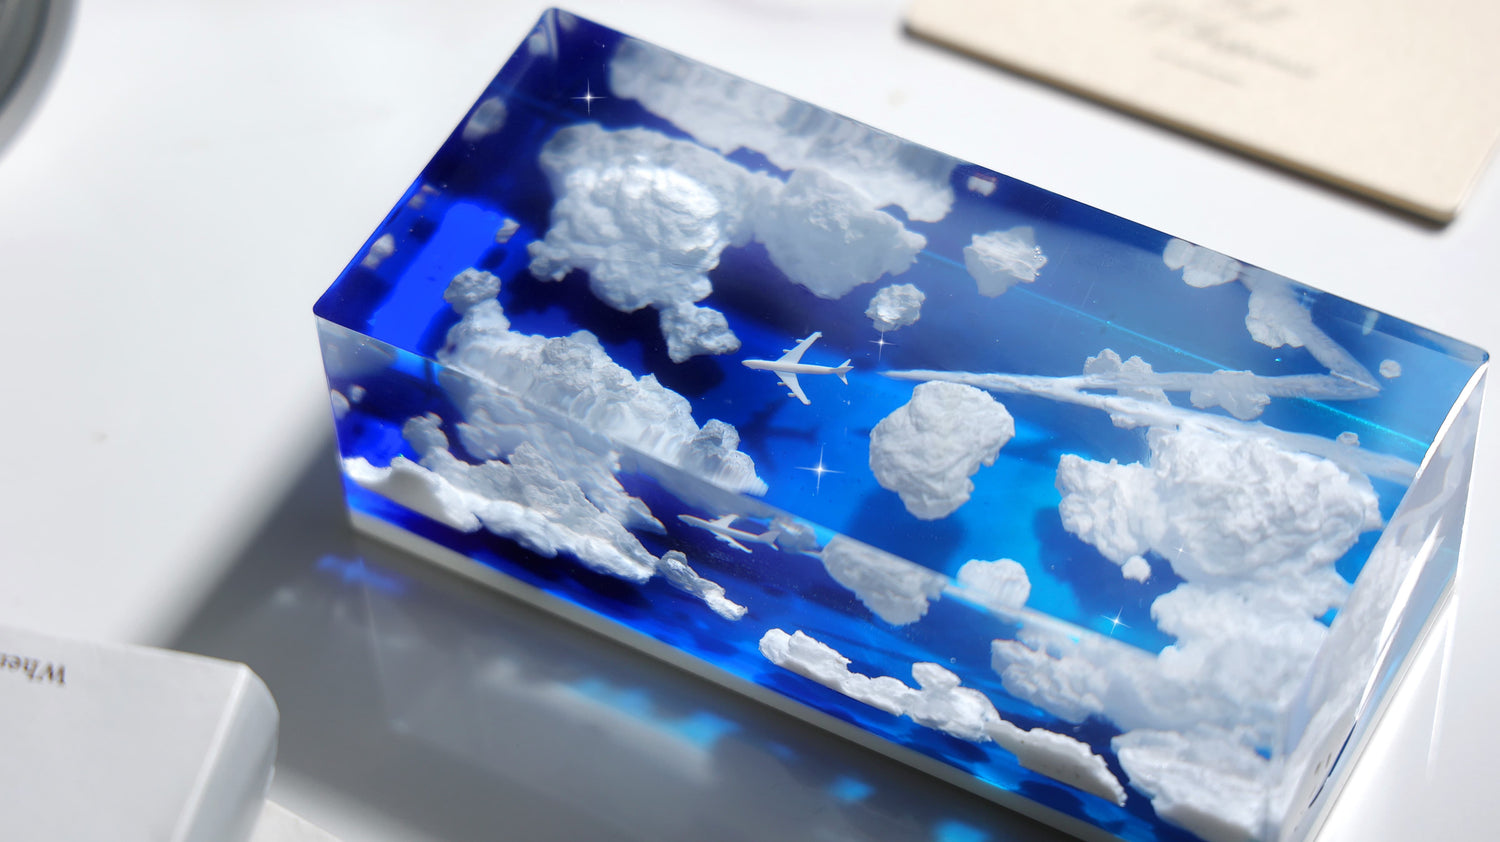 How to Make Cloudy Sky Effect in Resin Project